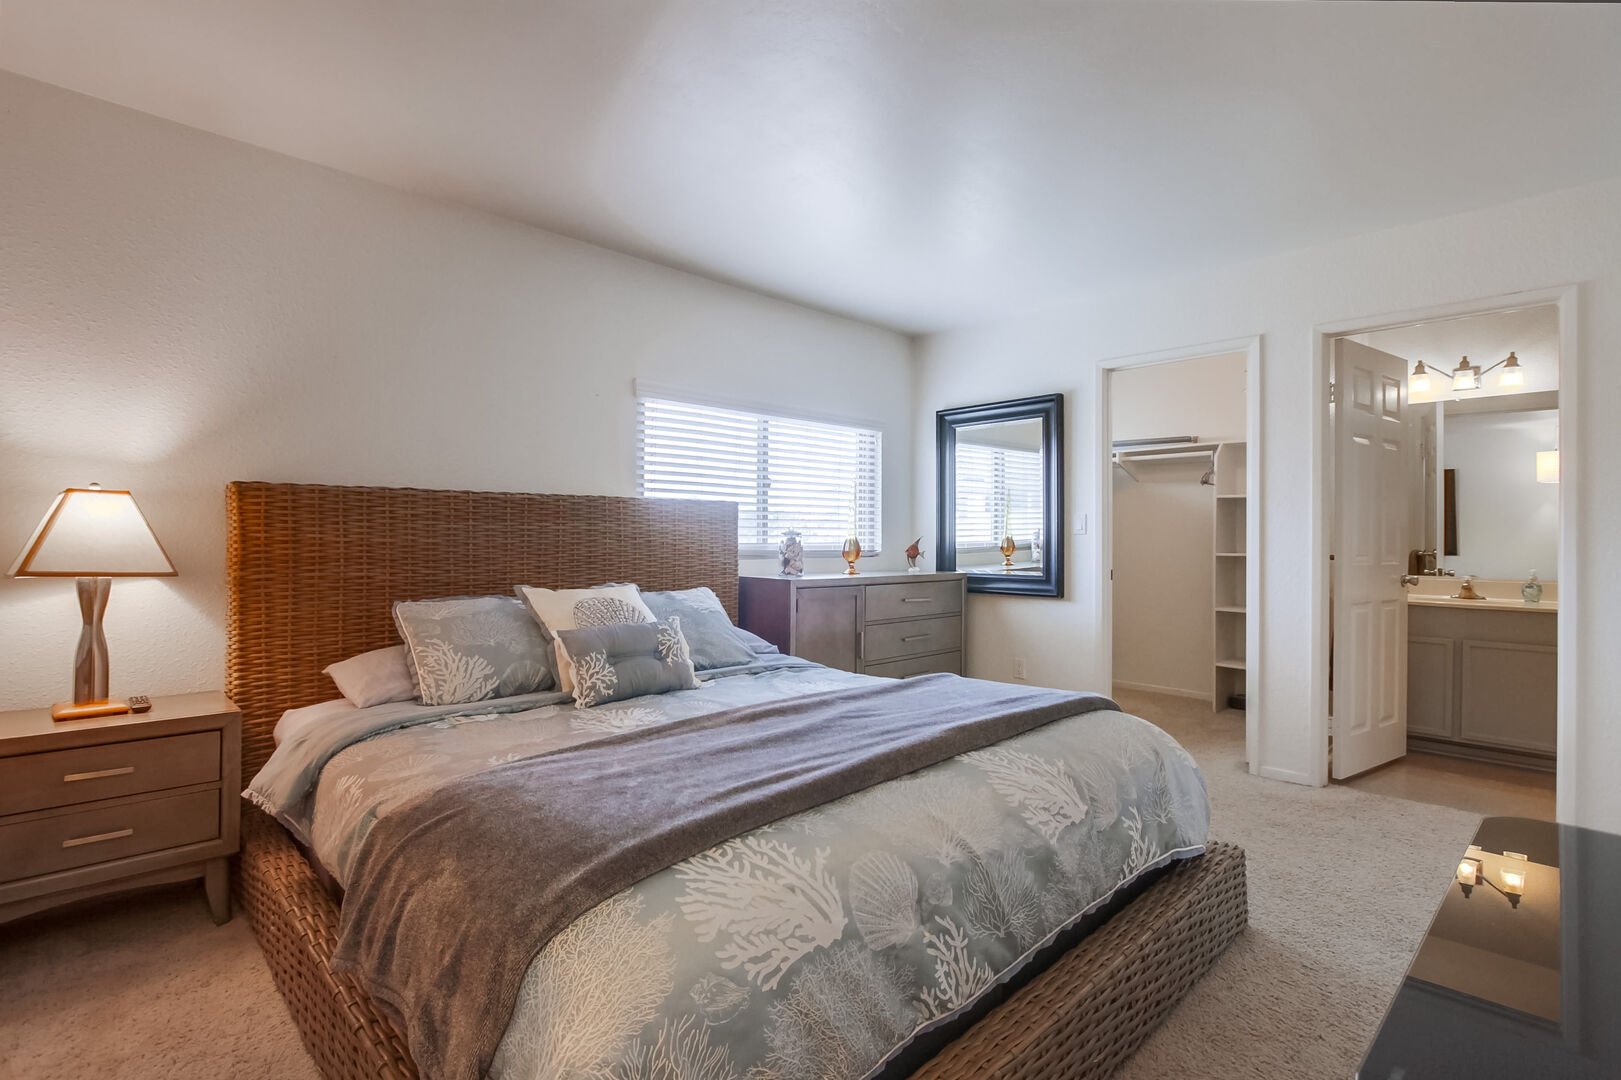 Upper level master bedroom with king size bed, dresser storage, large walk-in closet, smart TV and in-suite full bathroom